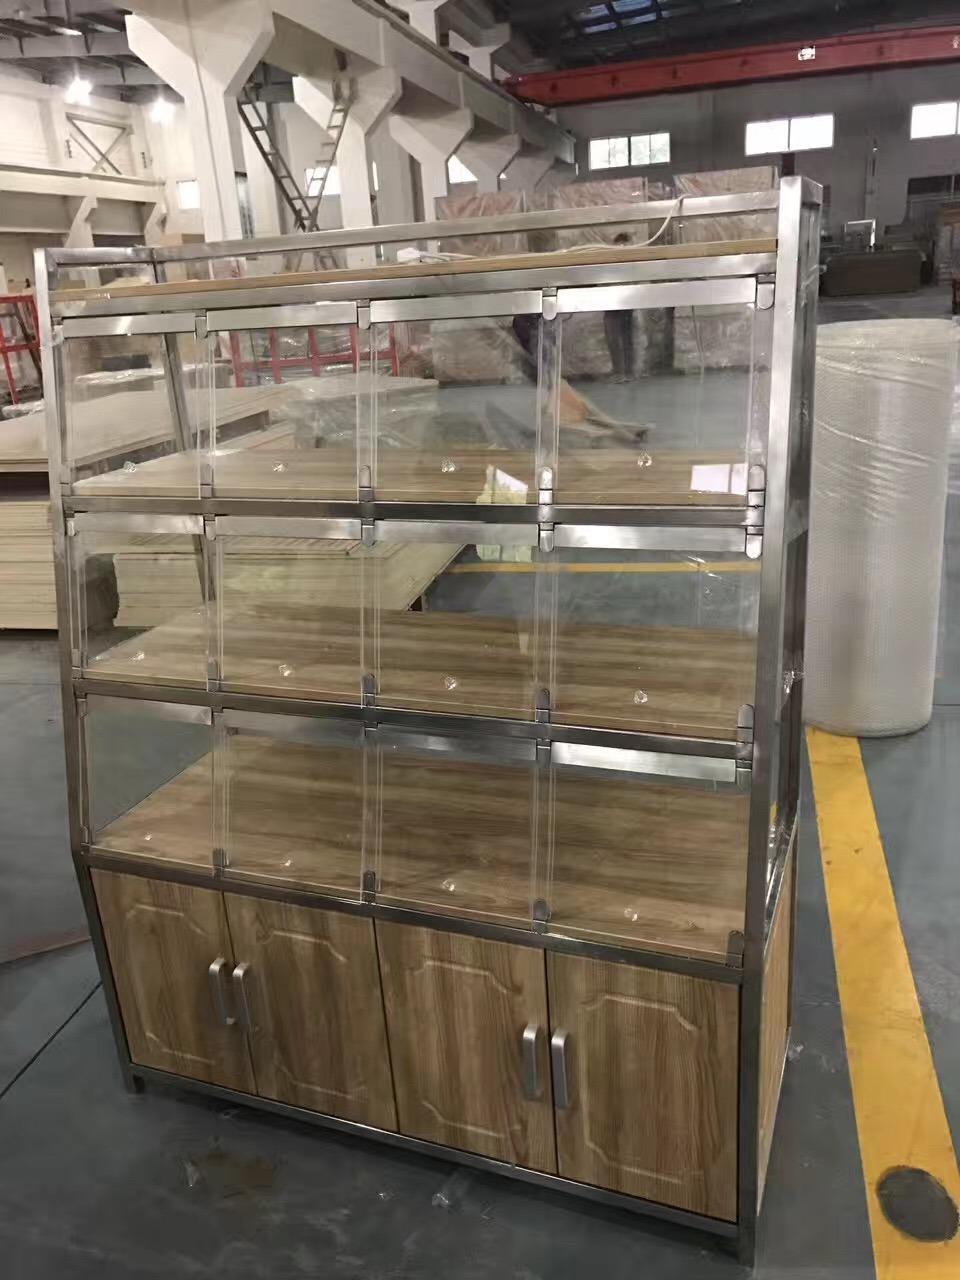 Bread Display Cabinet with Carton Cart Modeling and Glass Cover Showcase Perfect for Bakery Sales and Display